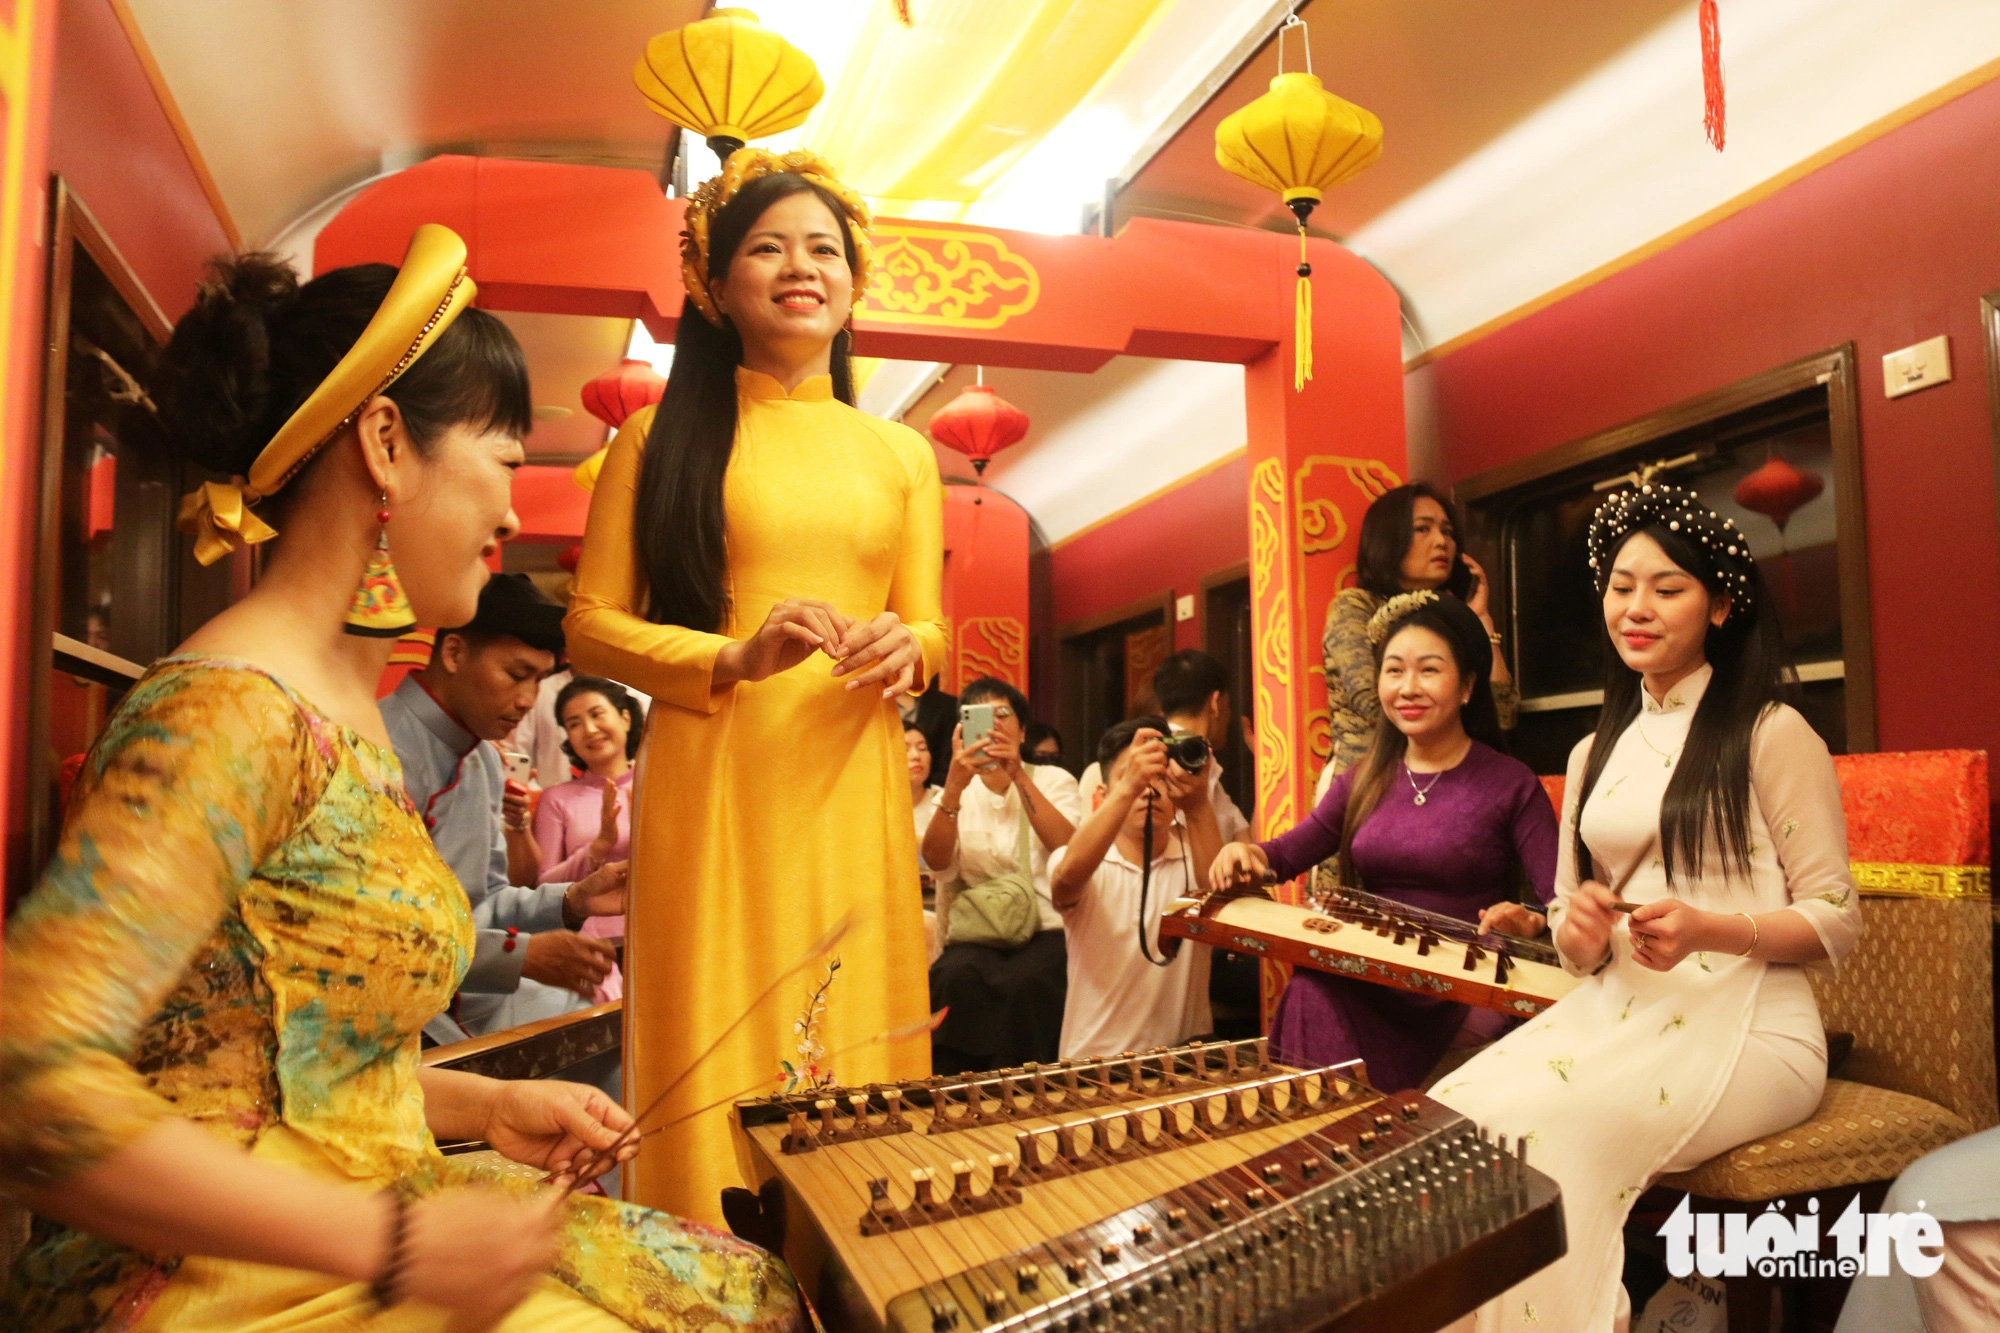 A performance of Hue chamber music is presented to visitors on the journey. Photo: Nhat Linh / Tuoi Tre